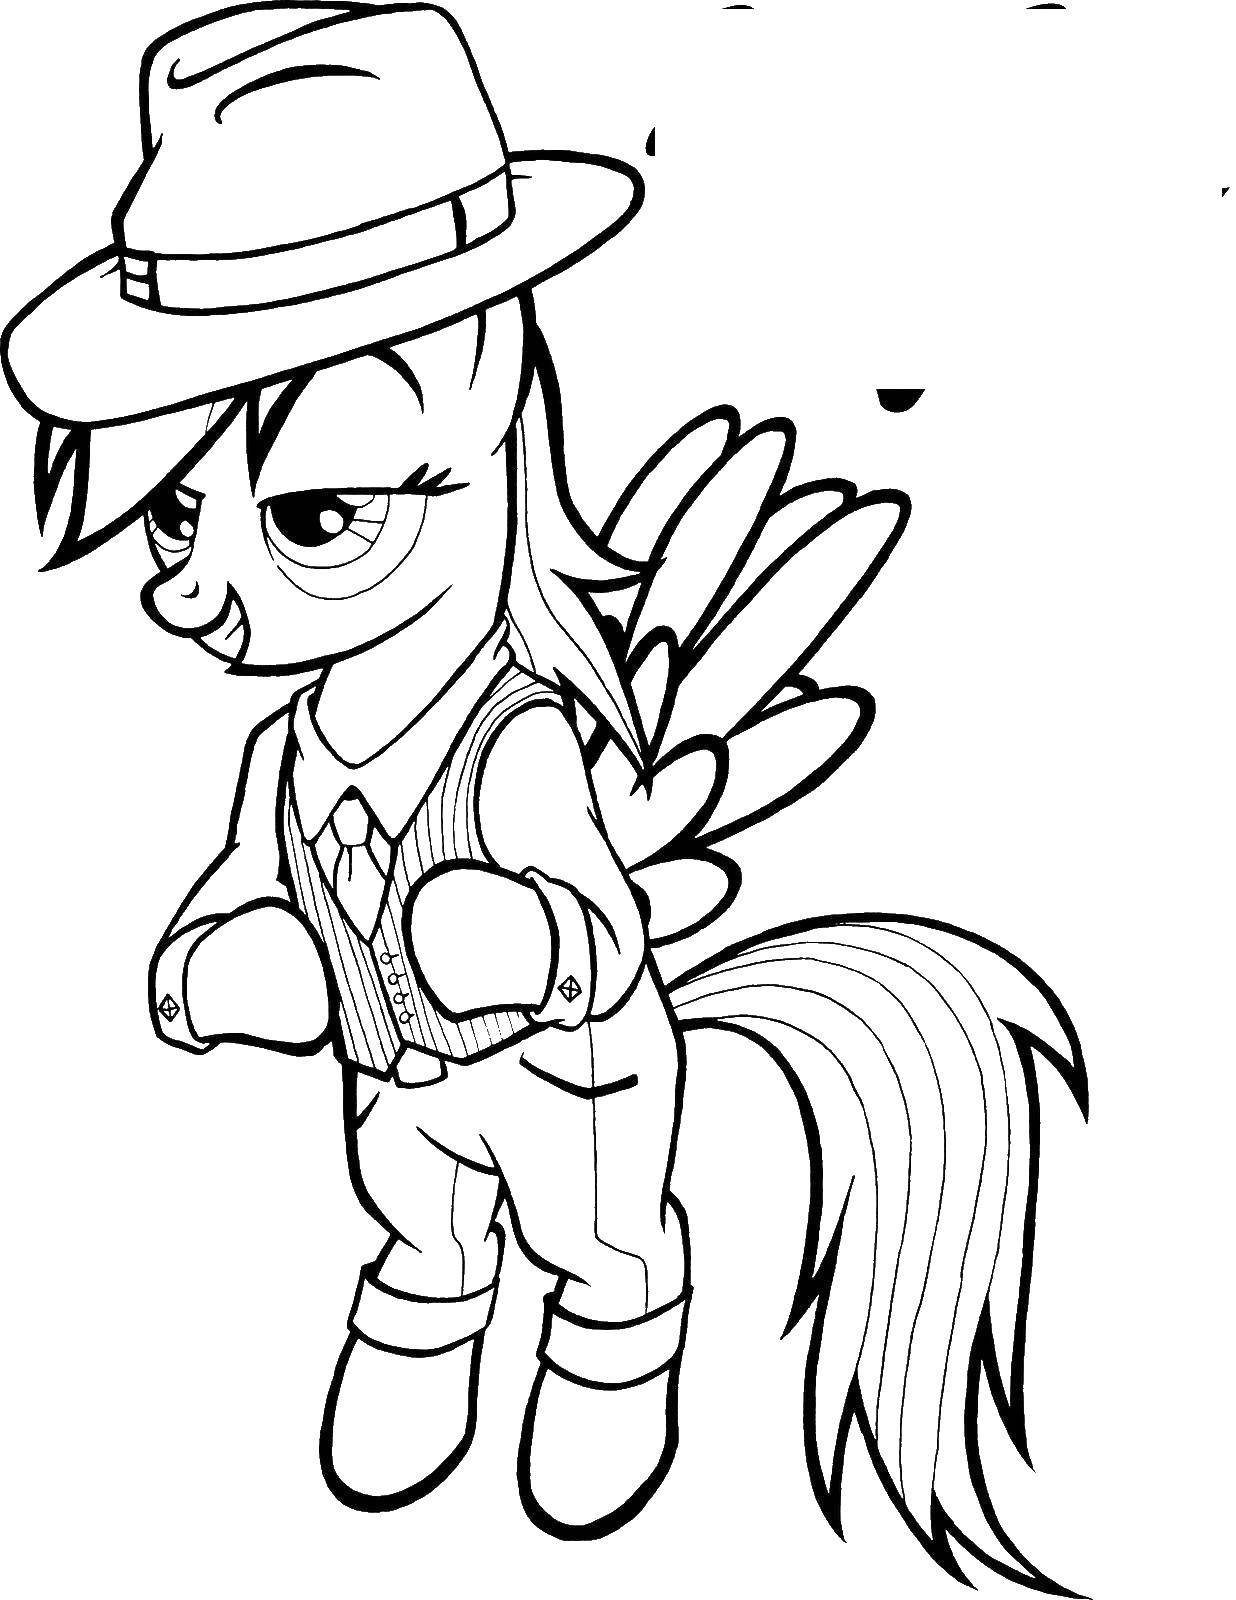 Coloring Rainbow in the suit. Category my little pony. Tags:  pony, rainbow.